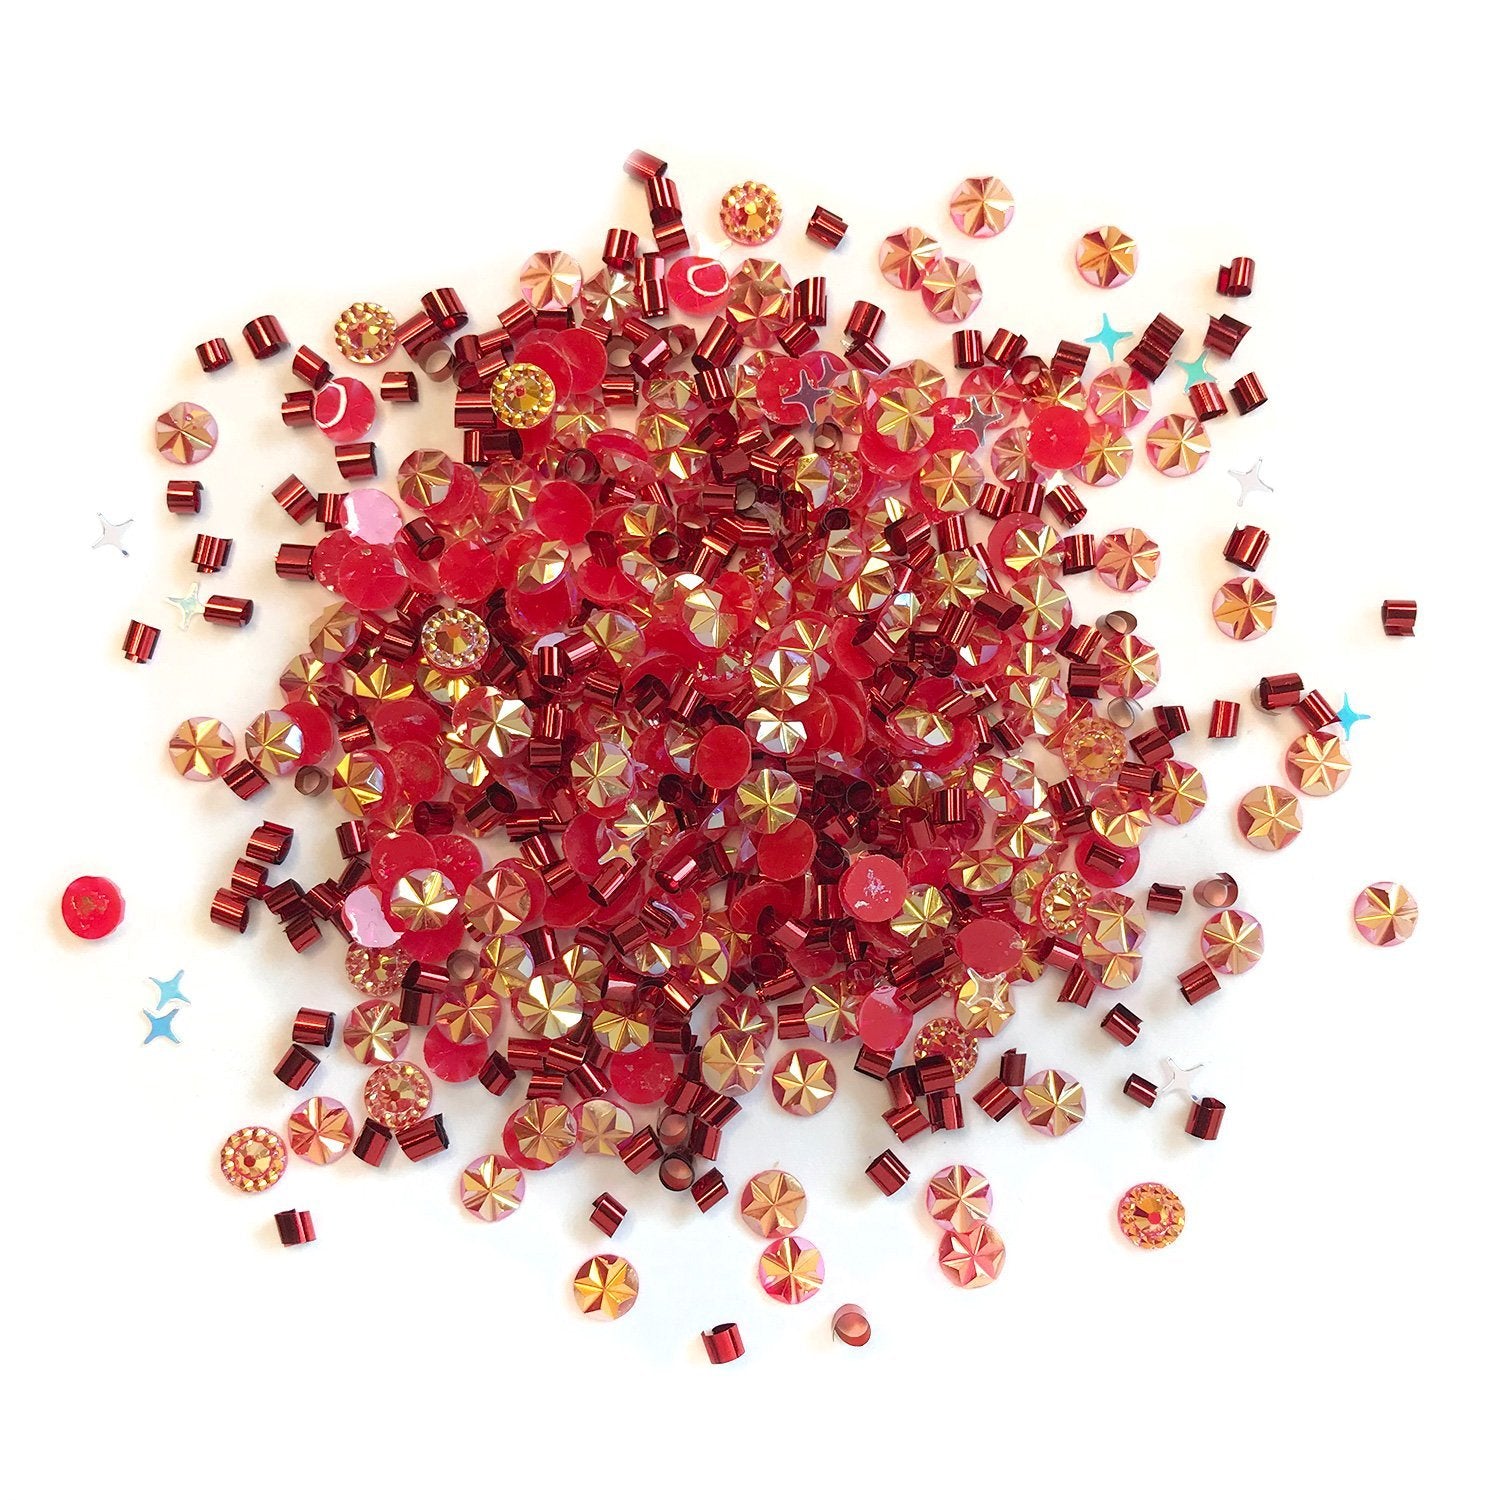 Red Gems & Jewels for Crafts & Jewelry Making, Buttons Galore